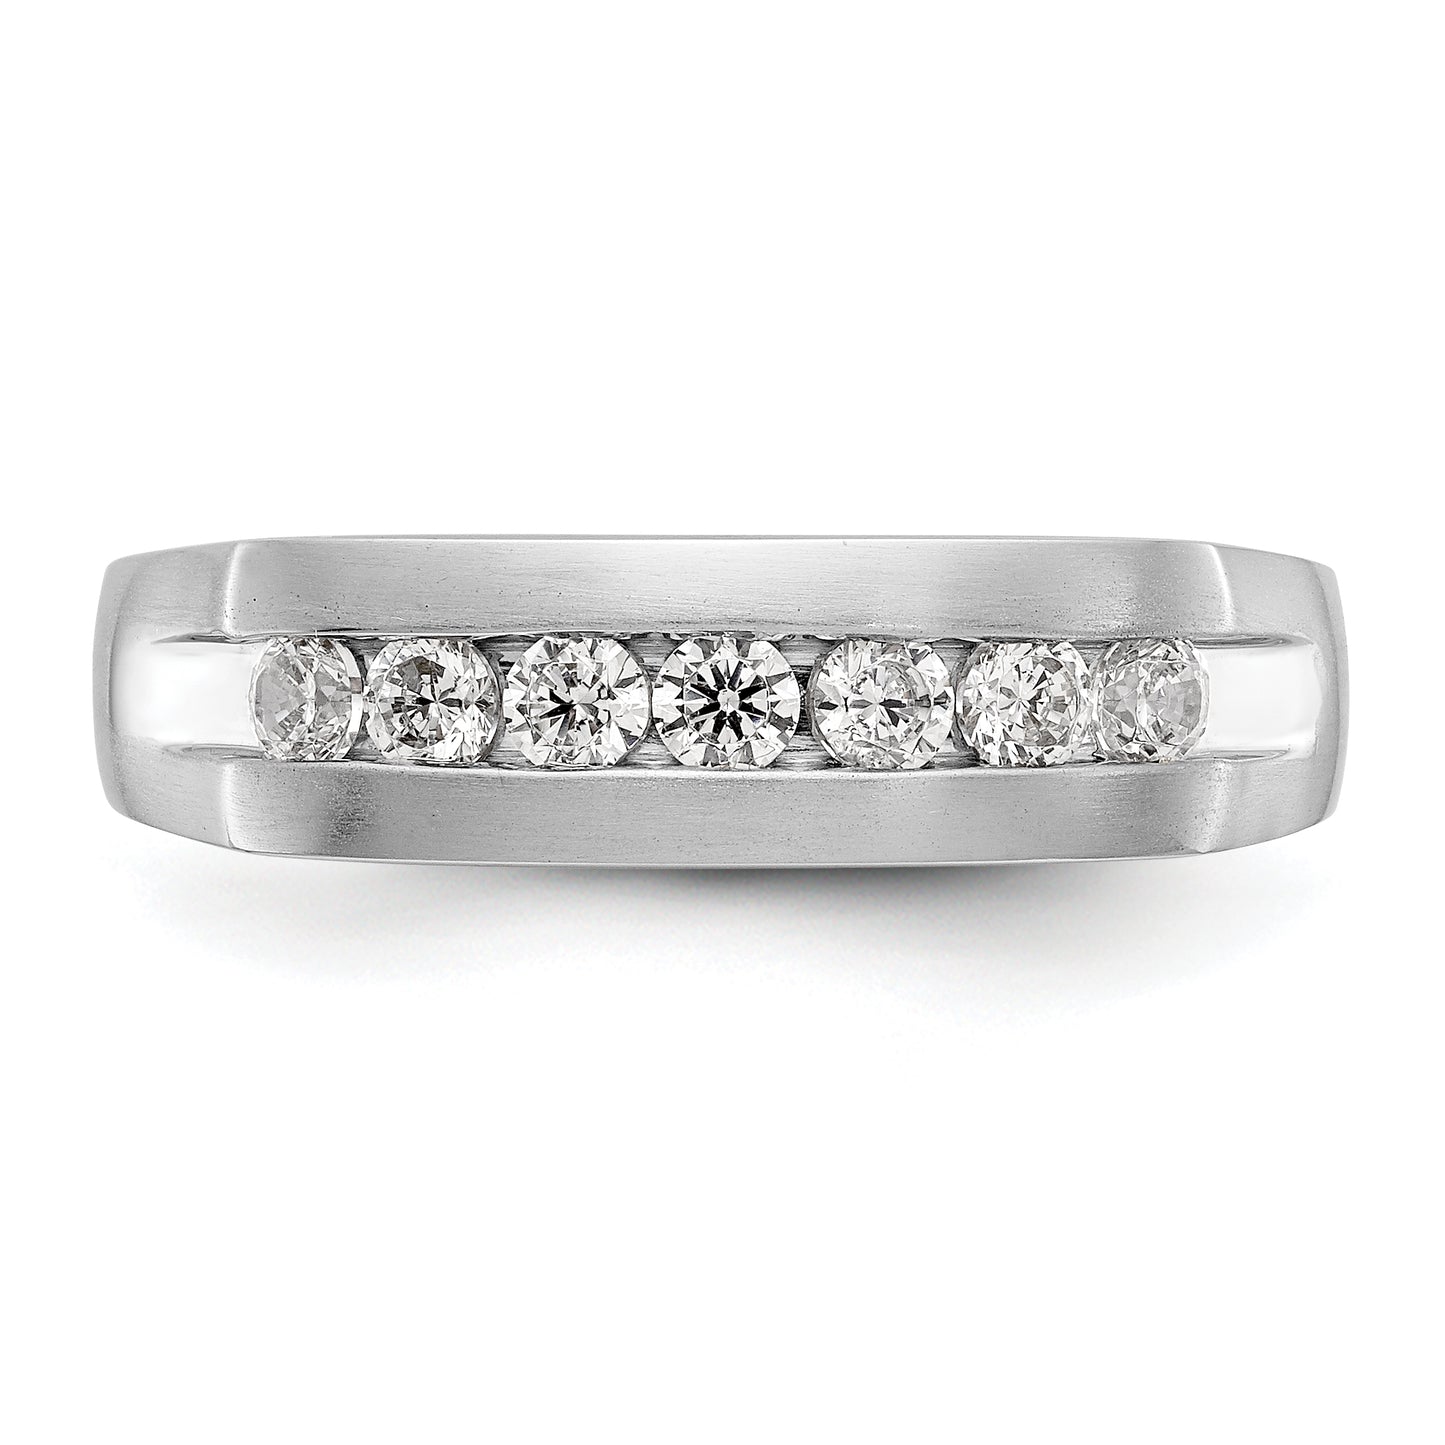 0.49ct. CZ Solid Real 14K White Gold Men's Wedding Band Ring